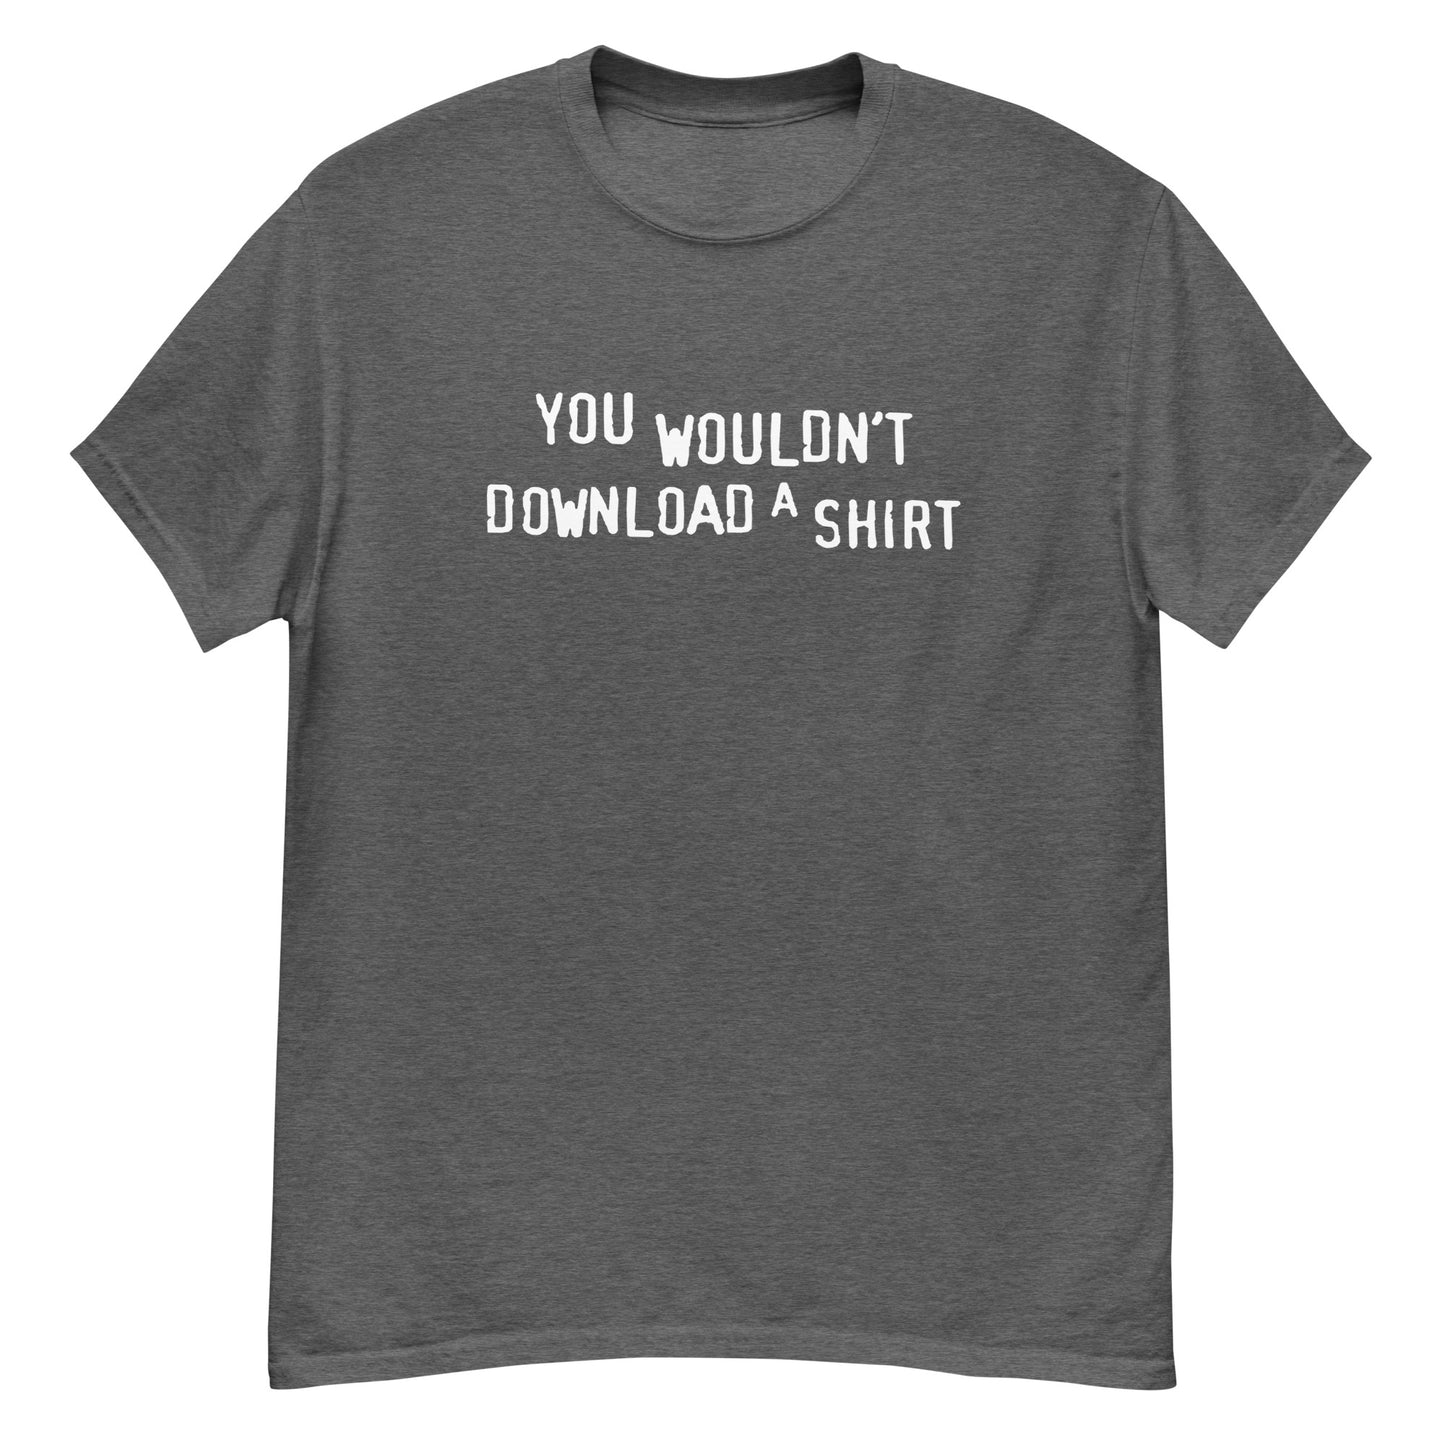 You Wouldn't Download a Shirt? tee